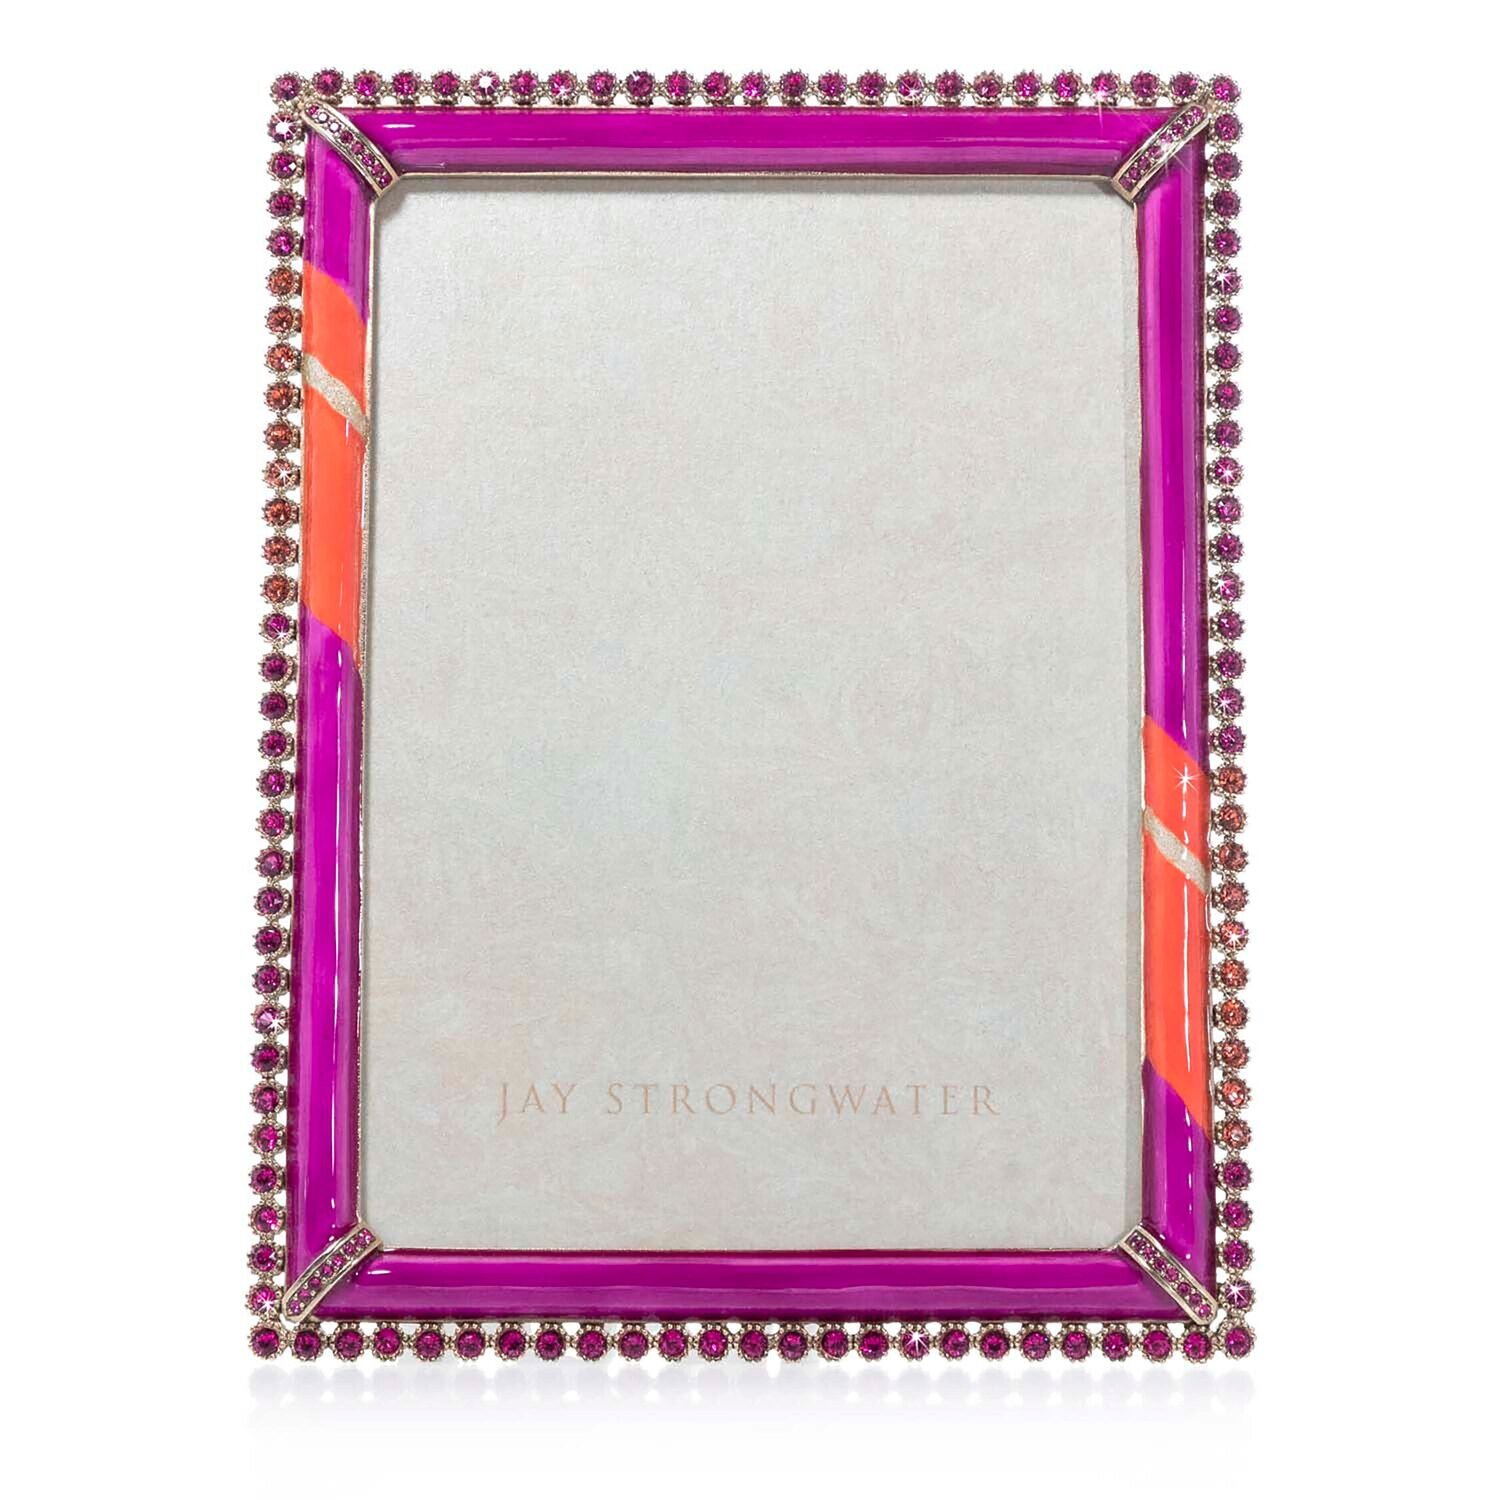 Jay Strongwater Lucas Stone Edge 5 x 7 Inch Picture Frame SPF5511-202